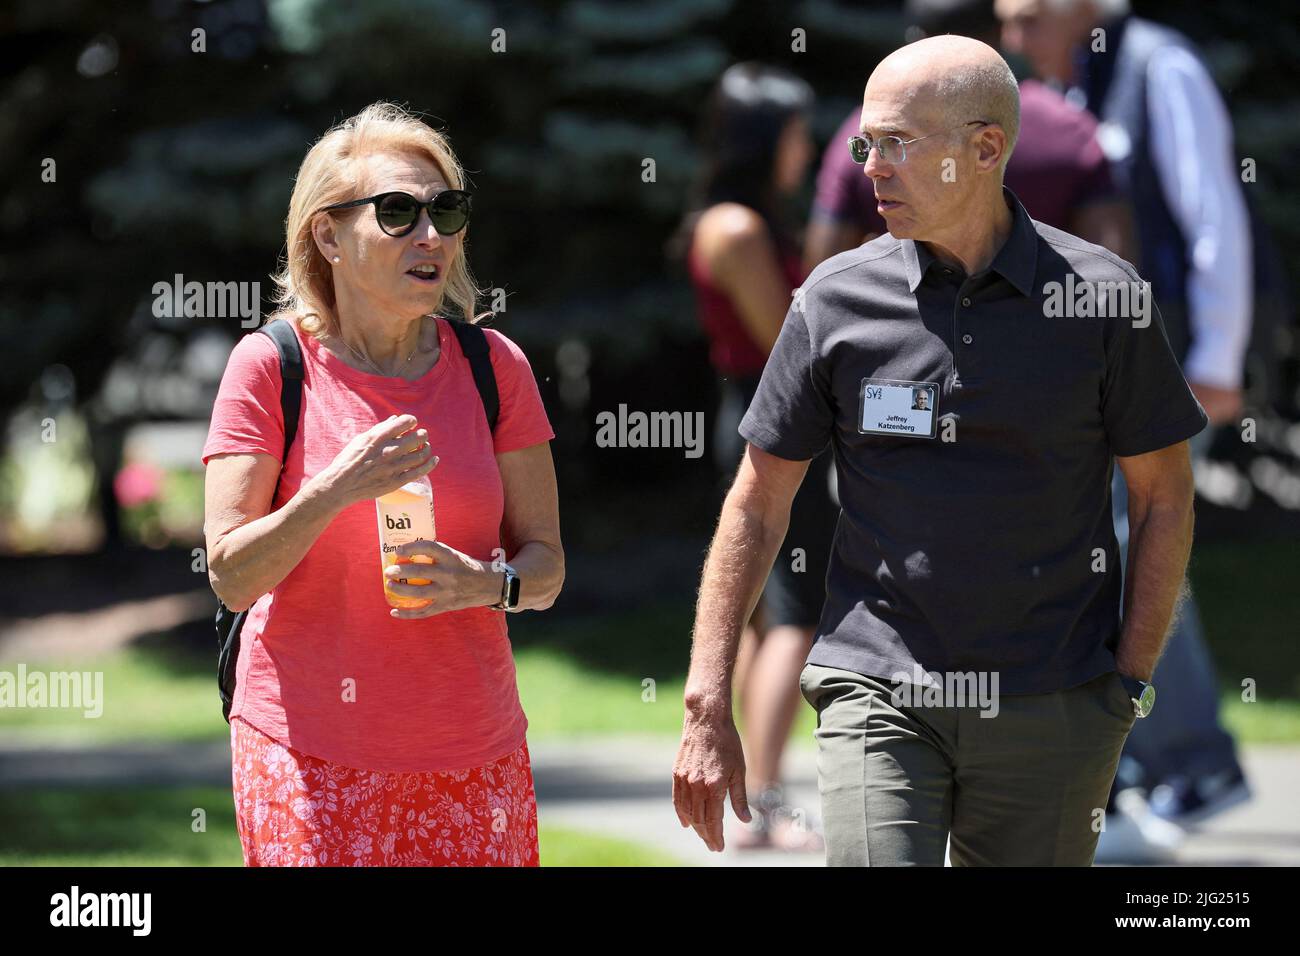 Shari Redstone, non-executive chairwoman of Paramount Global and president of National Amusements and Jeffrey Katzenberg attend the annual Allen and Co. Sun Valley Media Conference in Sun Valley, Idaho, U.S., July 6, 2022. REUTERS/Brendan McDermid Stock Photo